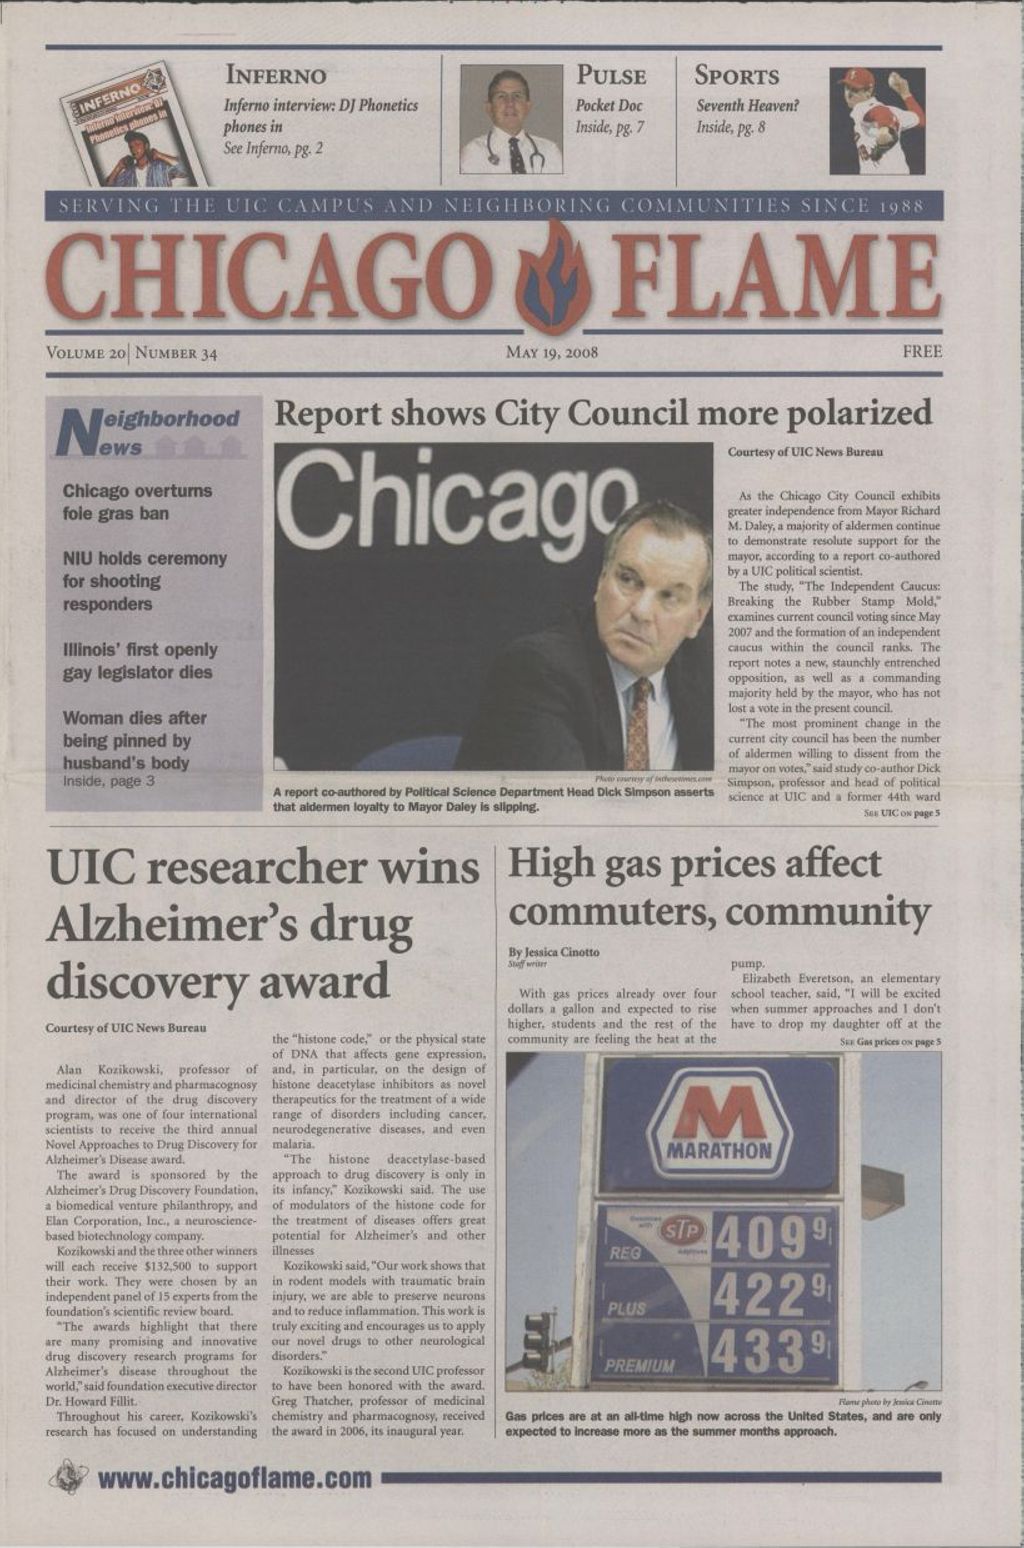 Chicago Flame (May 19, 2008)